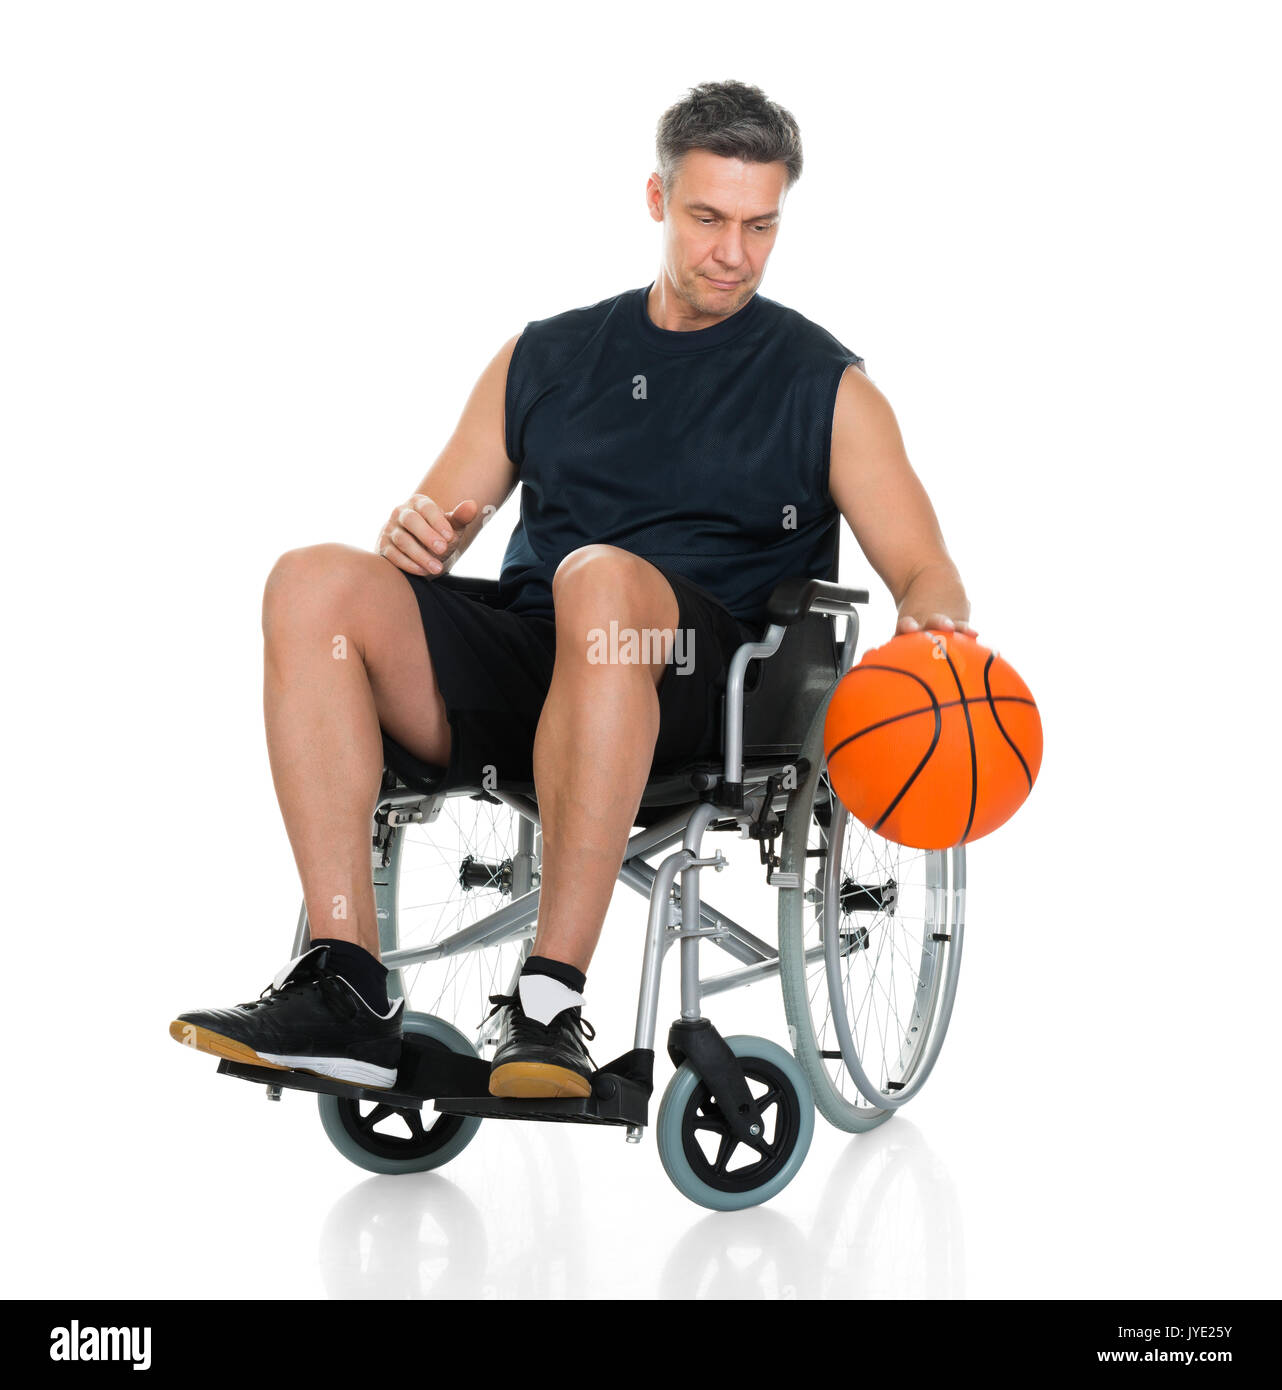 Disabled Player On Wheelchair Holding Basketball Over White Background Stock Photo